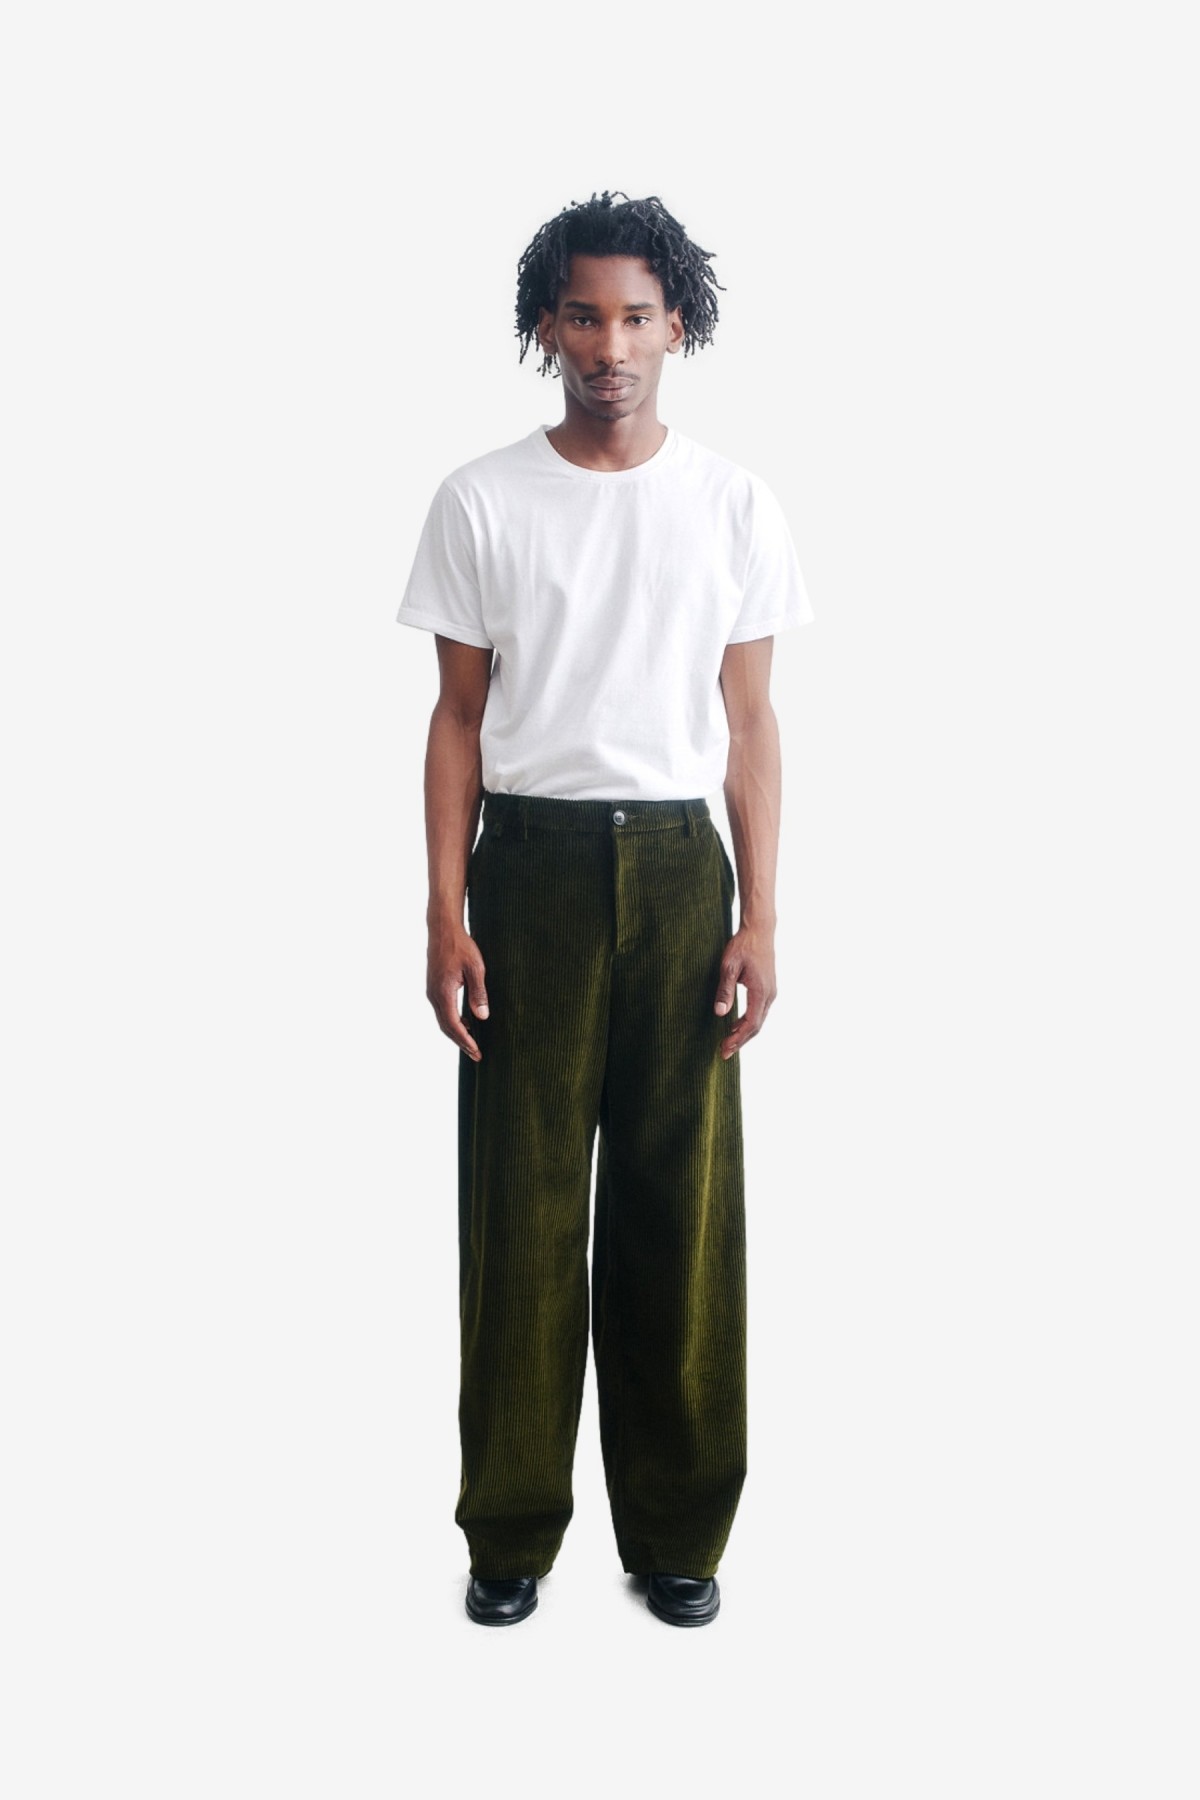 A Kind of Guise Vali Chino in Olive Corduroy